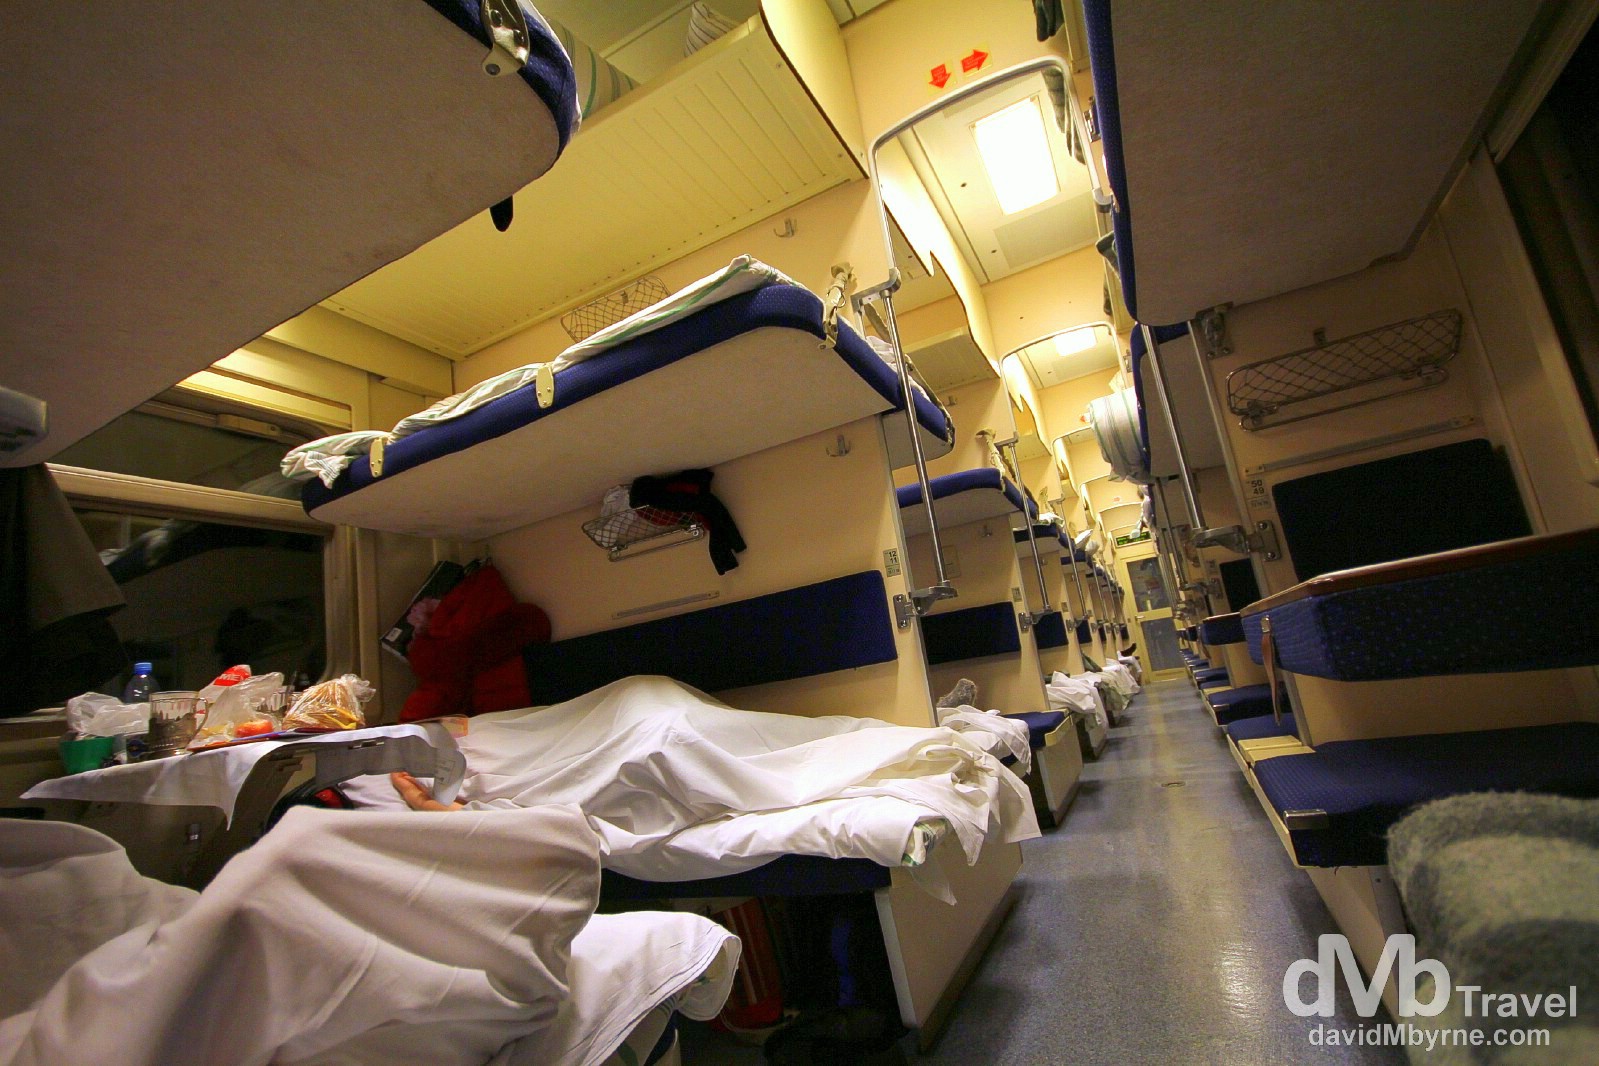 Inside the sparsely populated 3rd class/platzkart carriage number 2 of train 037. 3rd class/platzkart is an open-plan dormitory car with 54 bunks per carriage arranged in open compartments of 4 berths - 2 up/2 down - on one side (left of the picture) and 2 berths - 1 up/1 down - along the carriage wall on the other side of the aisle (right of the picture). Perfect for the budget-conscious traveller; the fare for this 48 hour+, 3,215 kilometre trip, was 3,900 roubles (€100). This carriage is new and half empty, which probably explains why I'm still all alone in my 4 berth compartment. On the train from Tomsk to Nizhny Novgorod, Russia. November 12th 2012. 